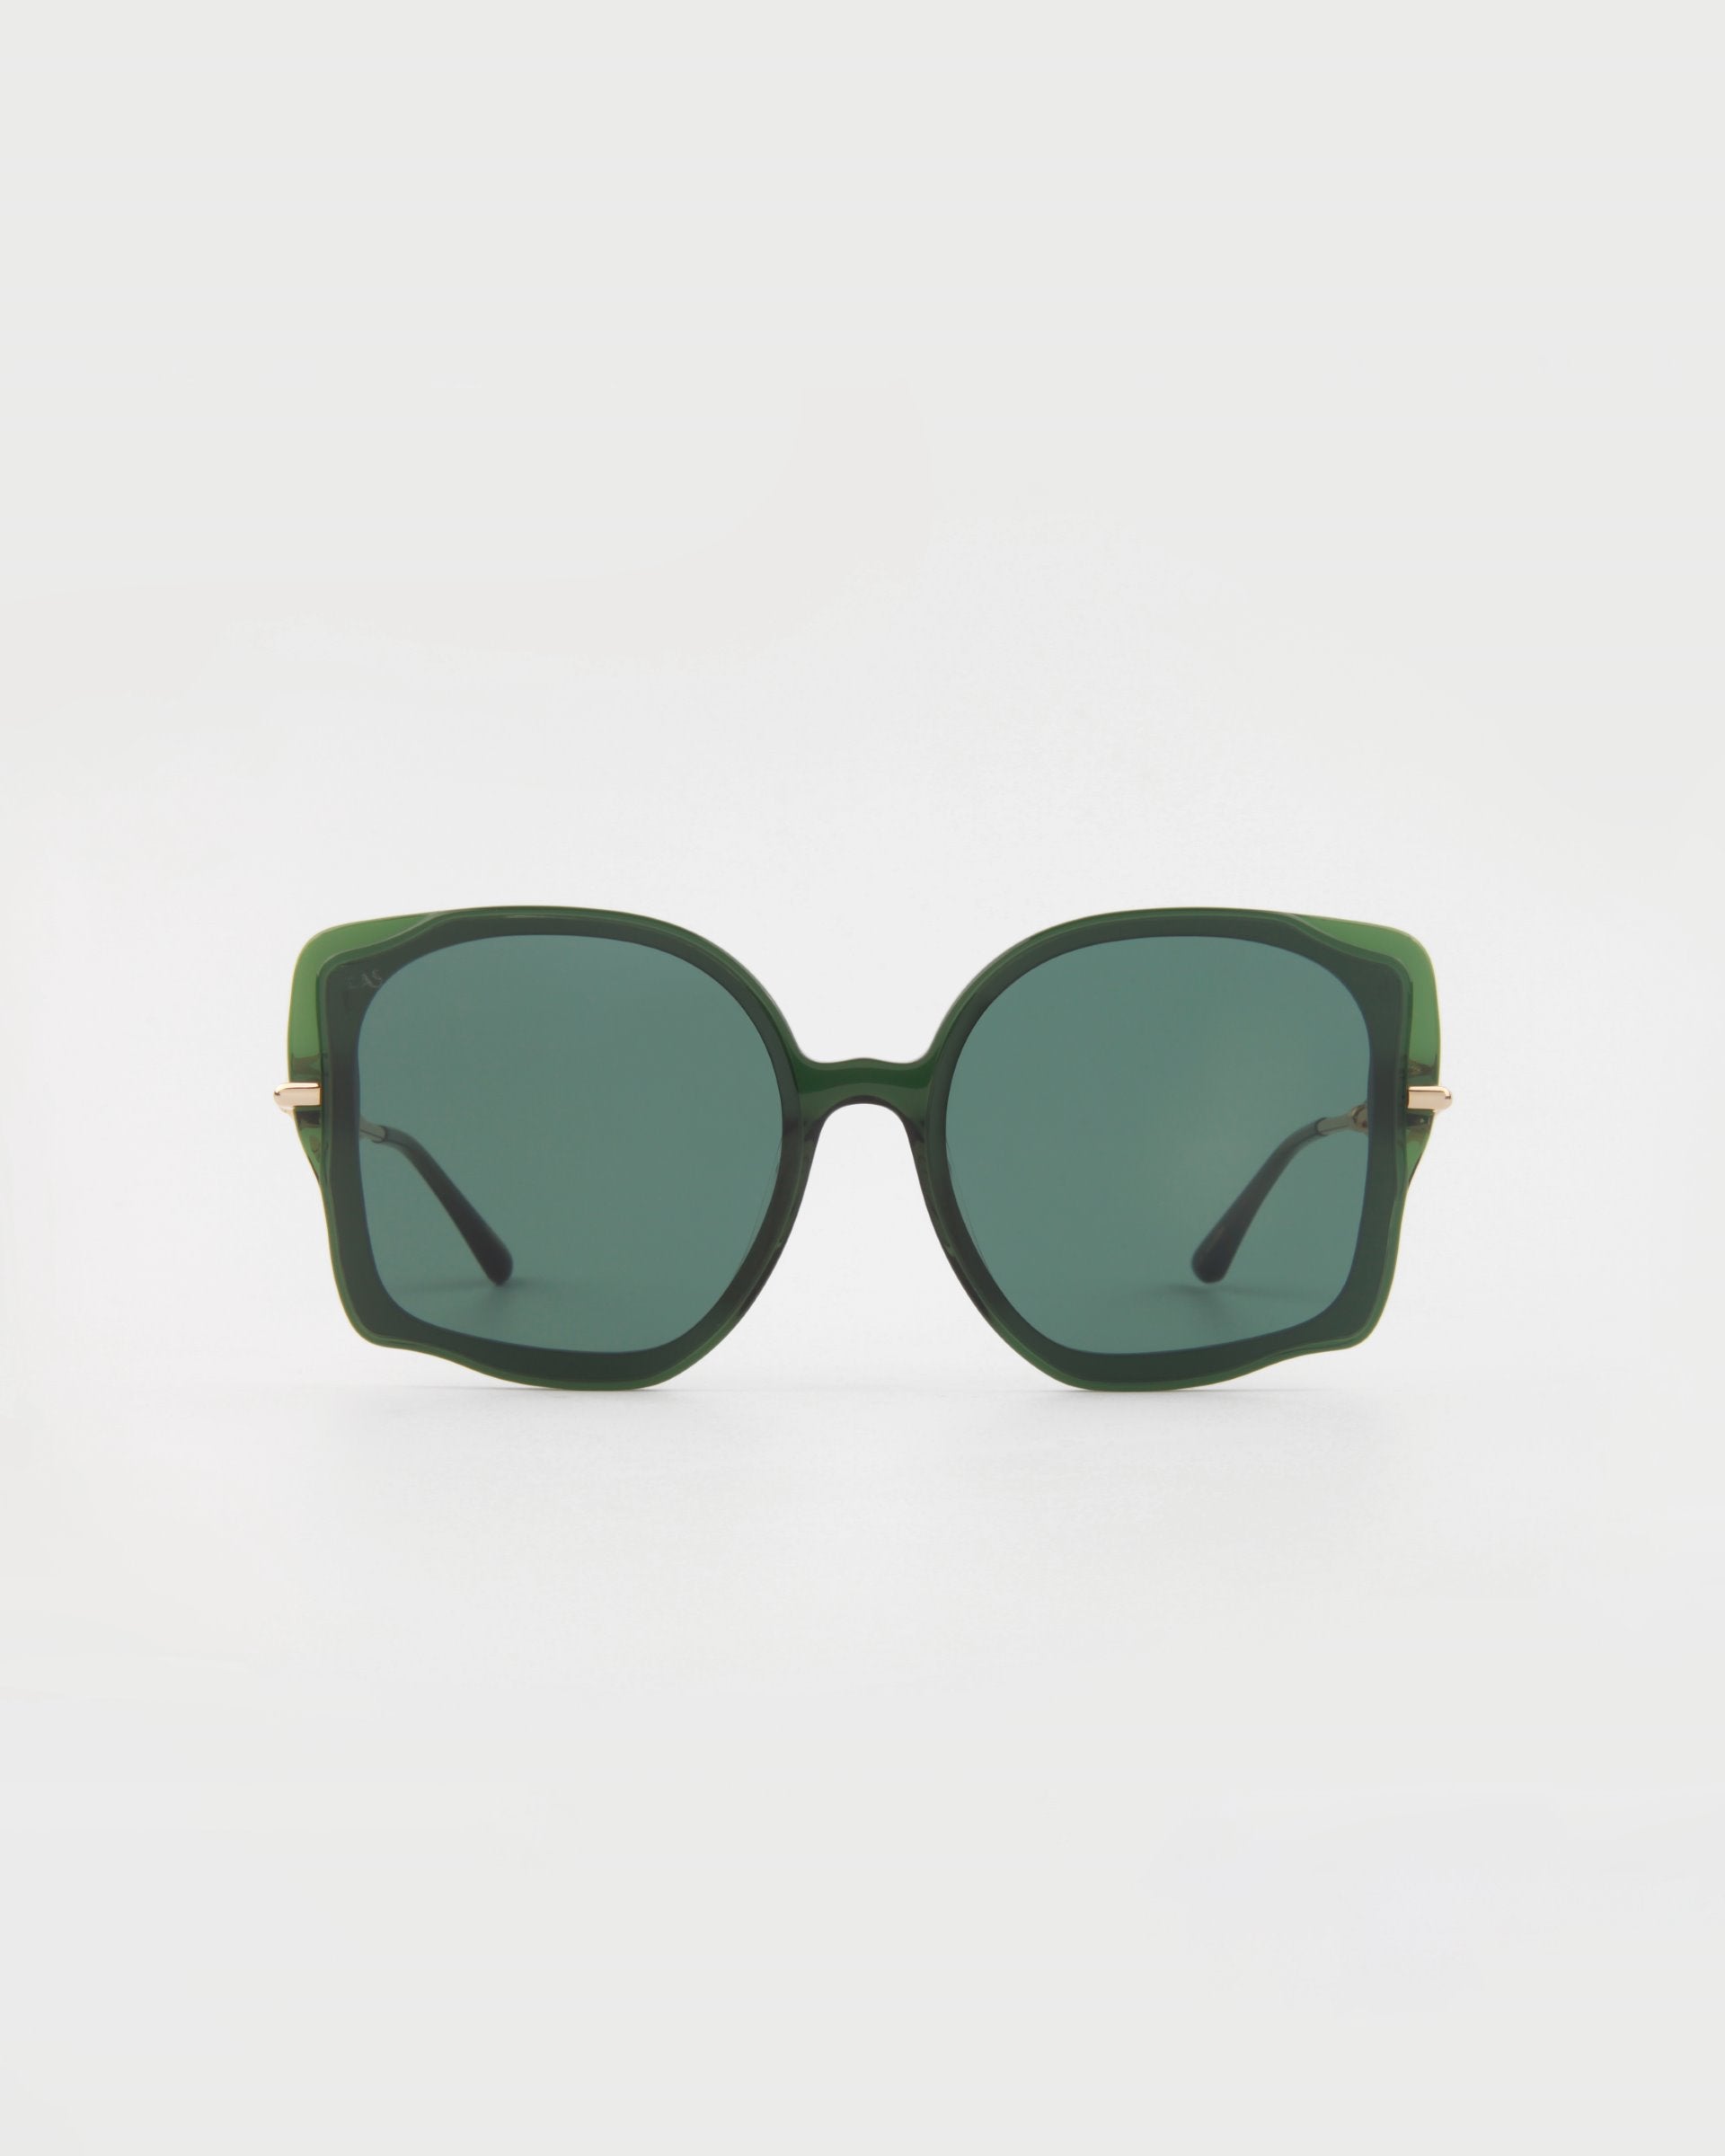 A pair of stylish, oversized square Fahrenheit sunglasses with dark green lenses and matching handmade acetate frames from For Art's Sake®. The temples feature 18-karat gold-plated accents near the hinges. The Fahrenheit sunglasses are set against a plain white background.